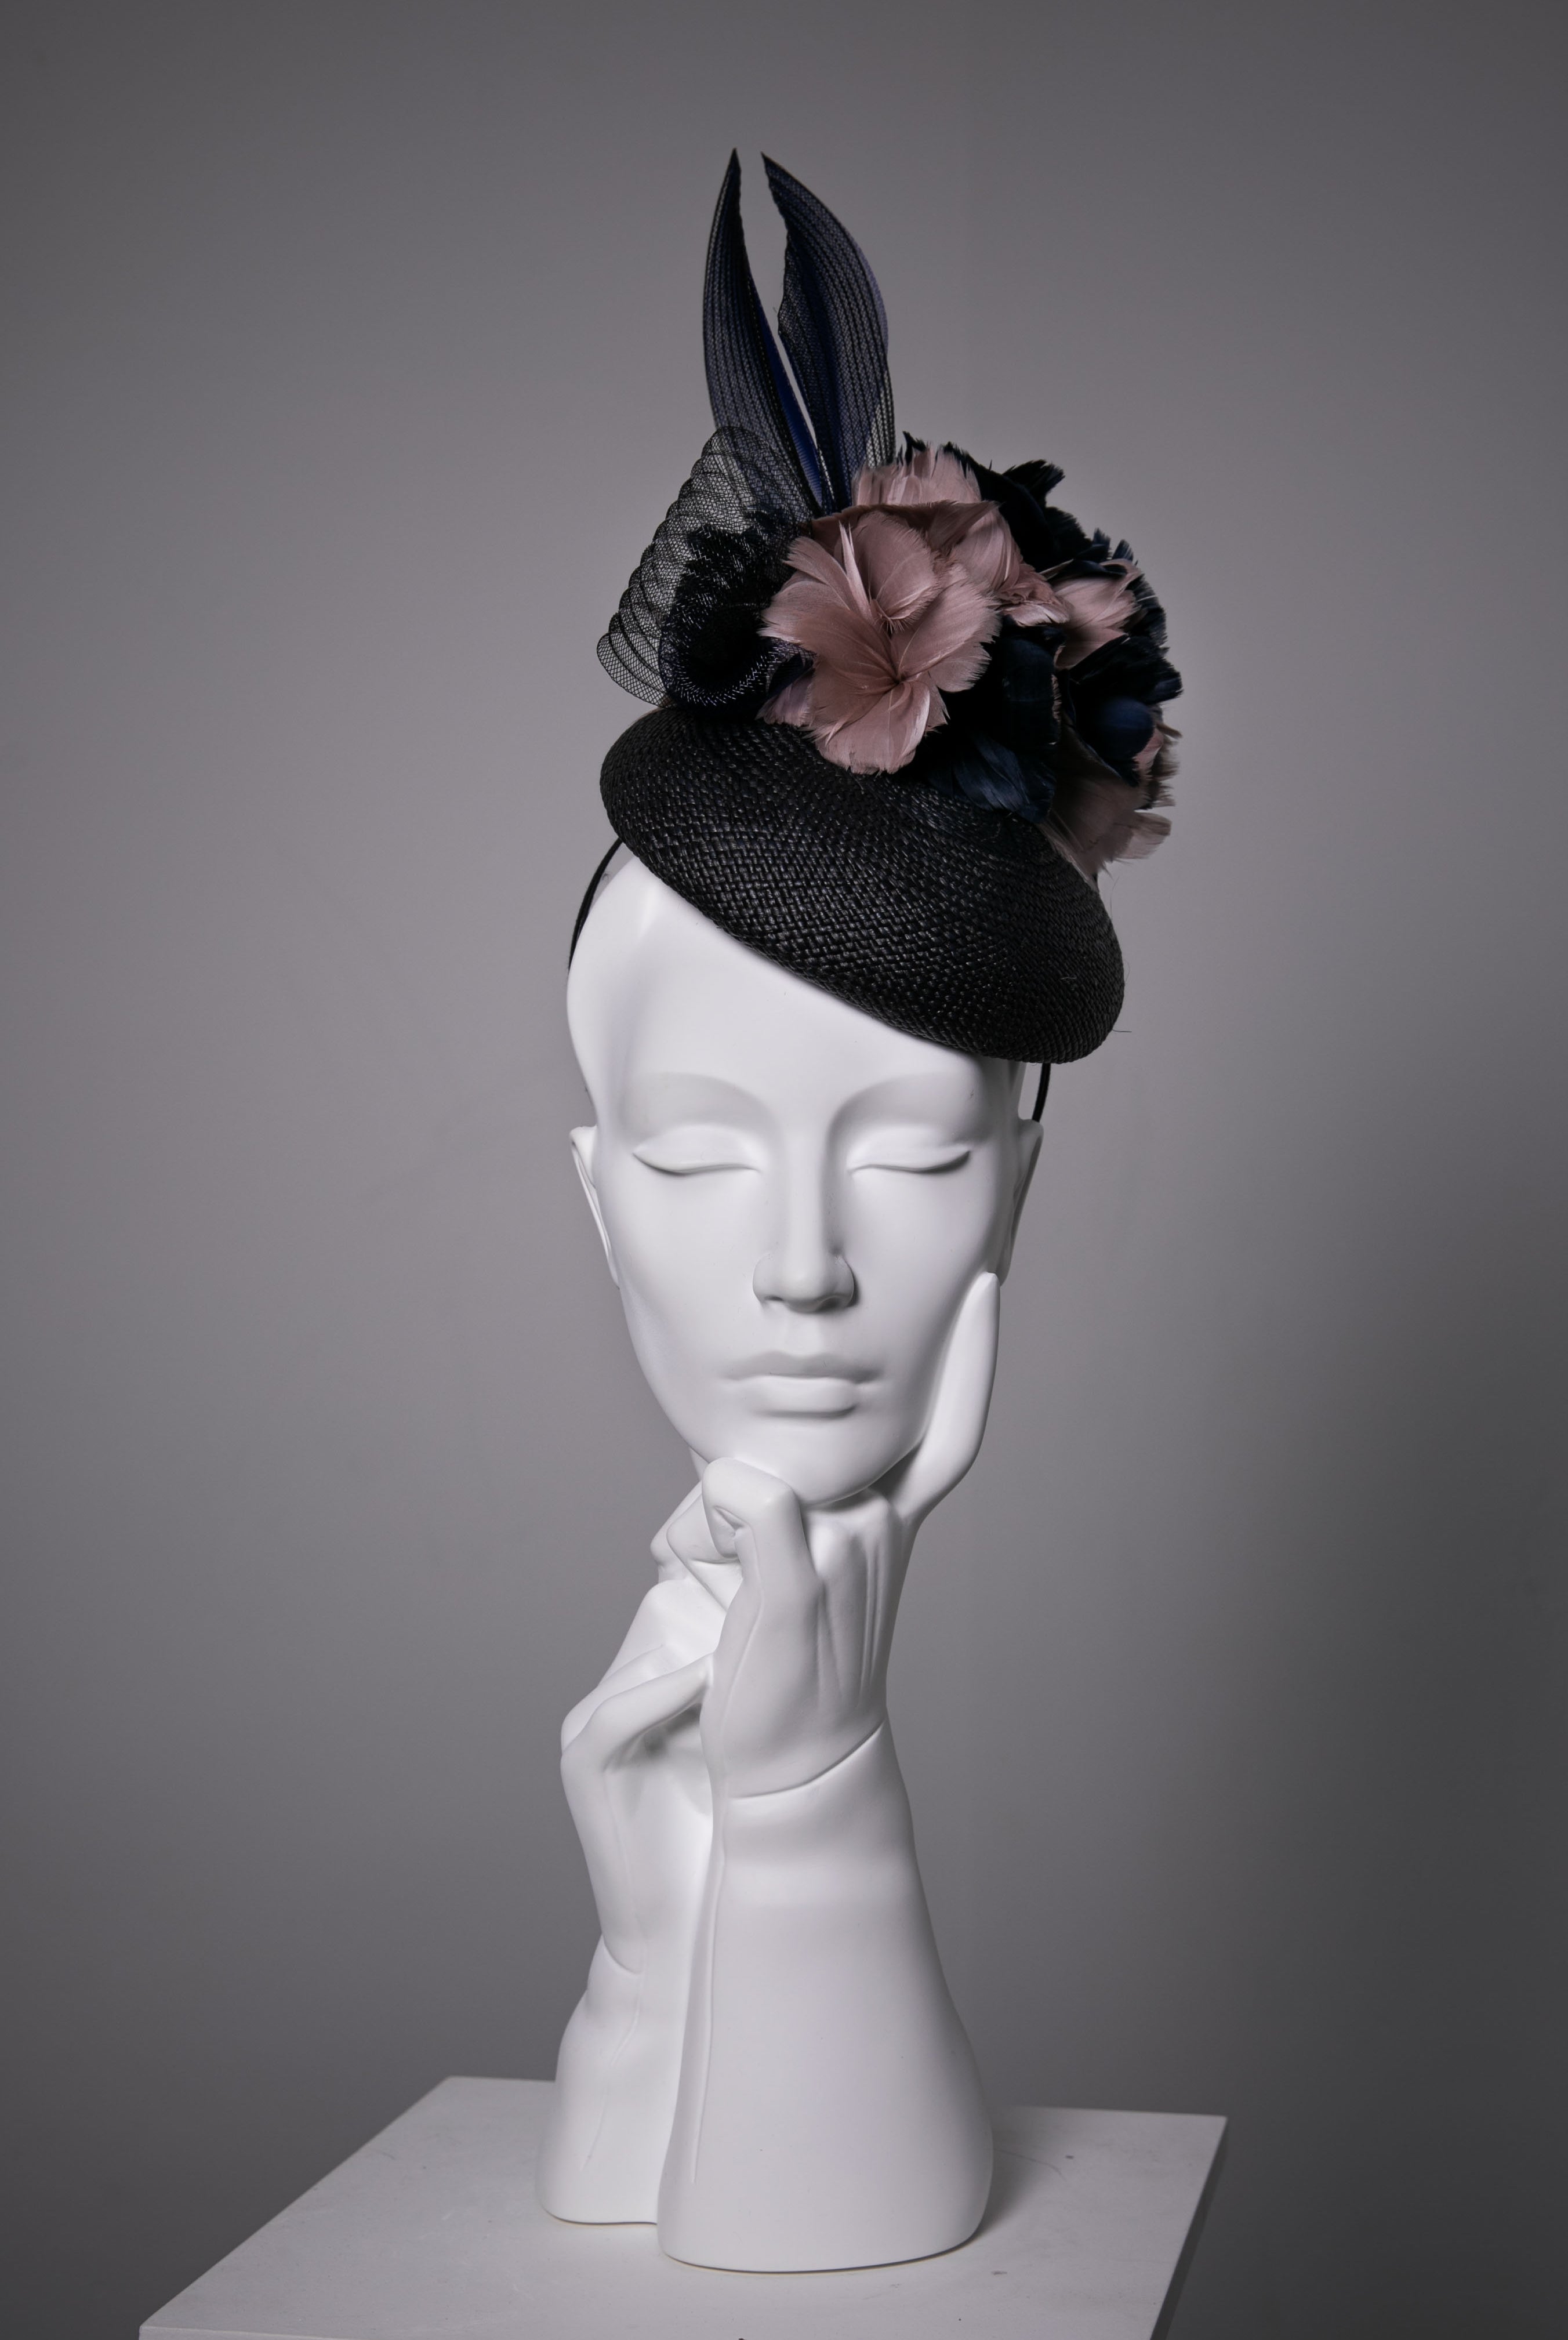 Cocktail Hat with Feather Flowers - Liv - Hat cocktail - hire - Maggie Mowbray Millinery